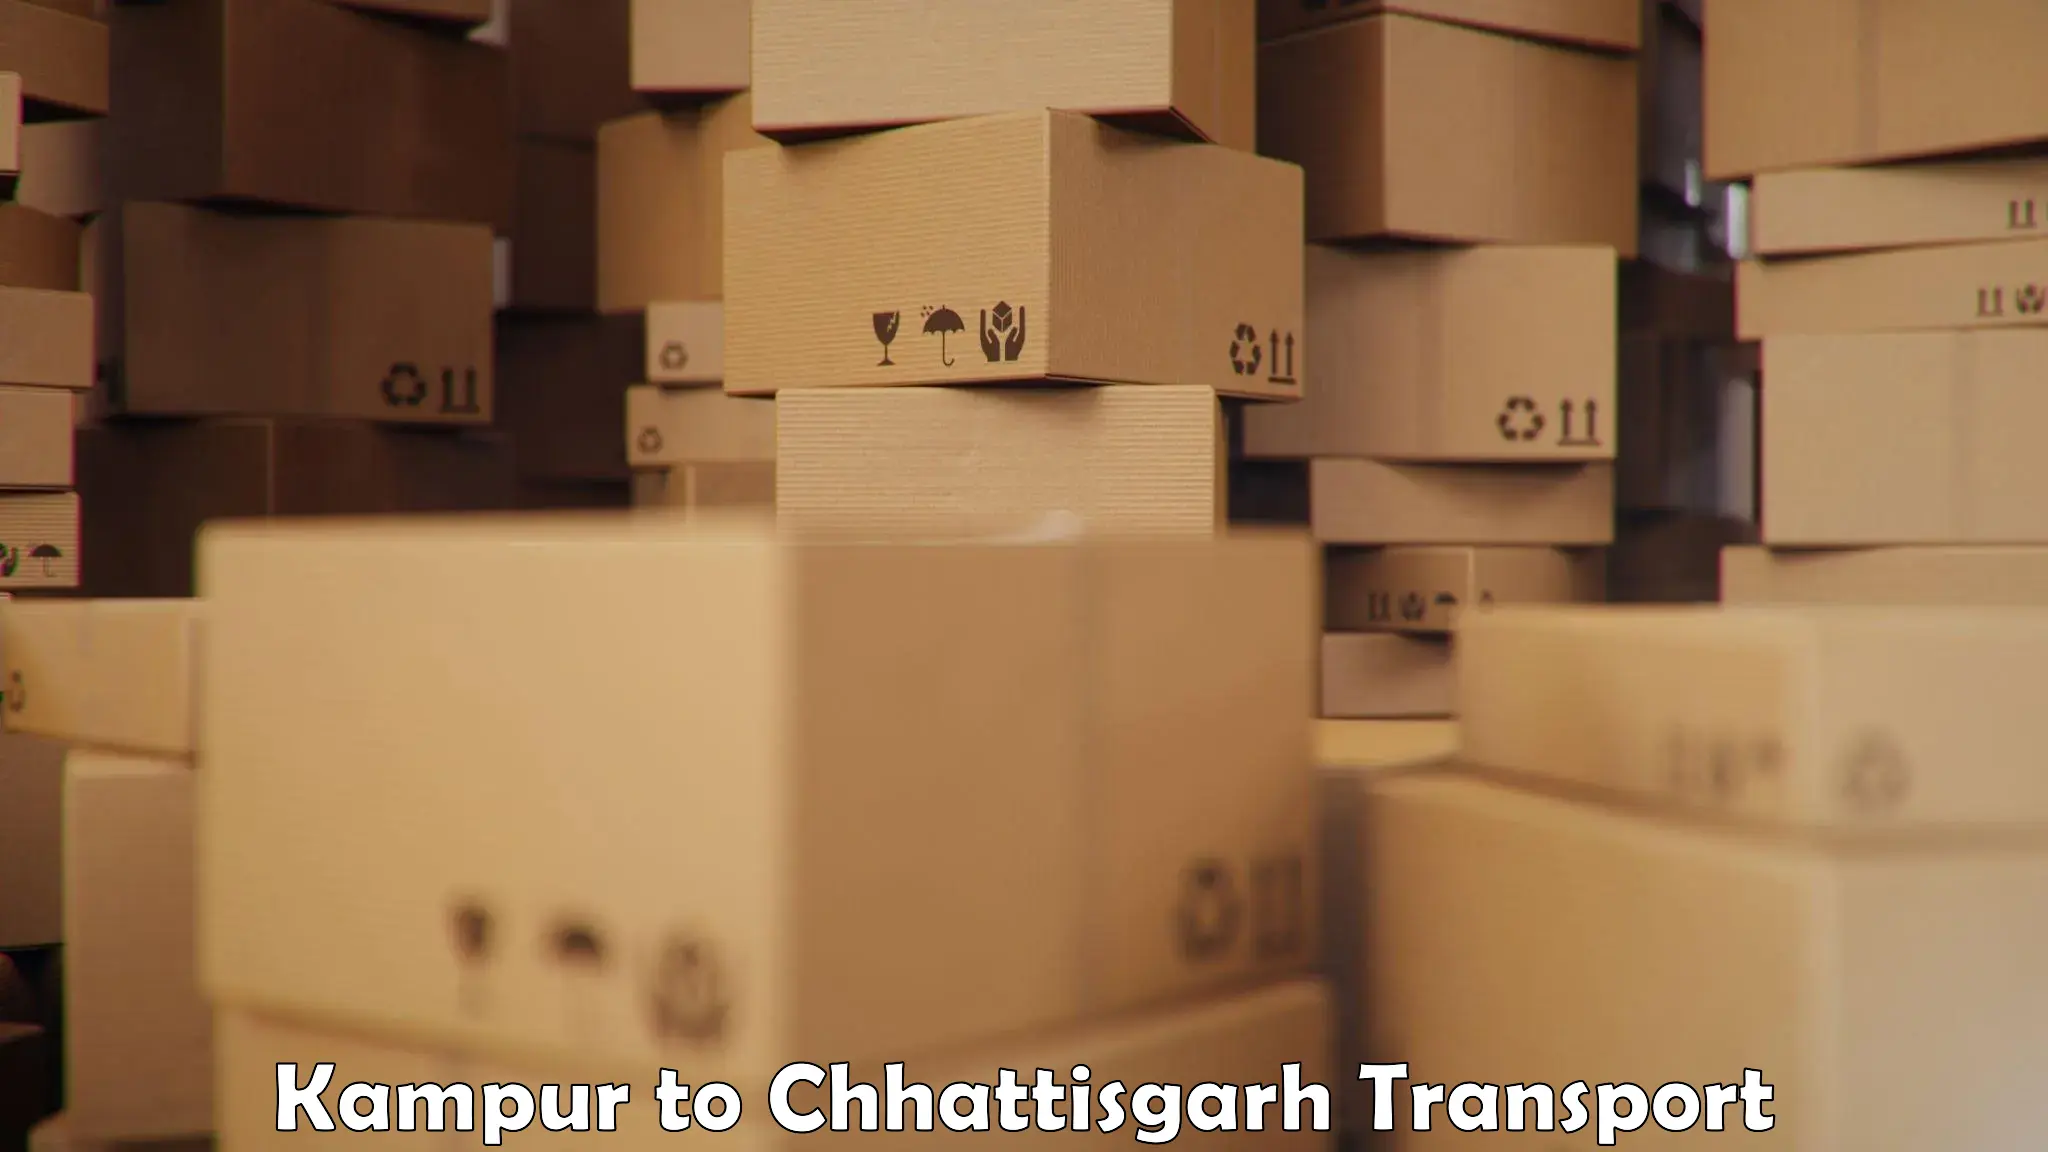 Container transport service Kampur to Dhamtari